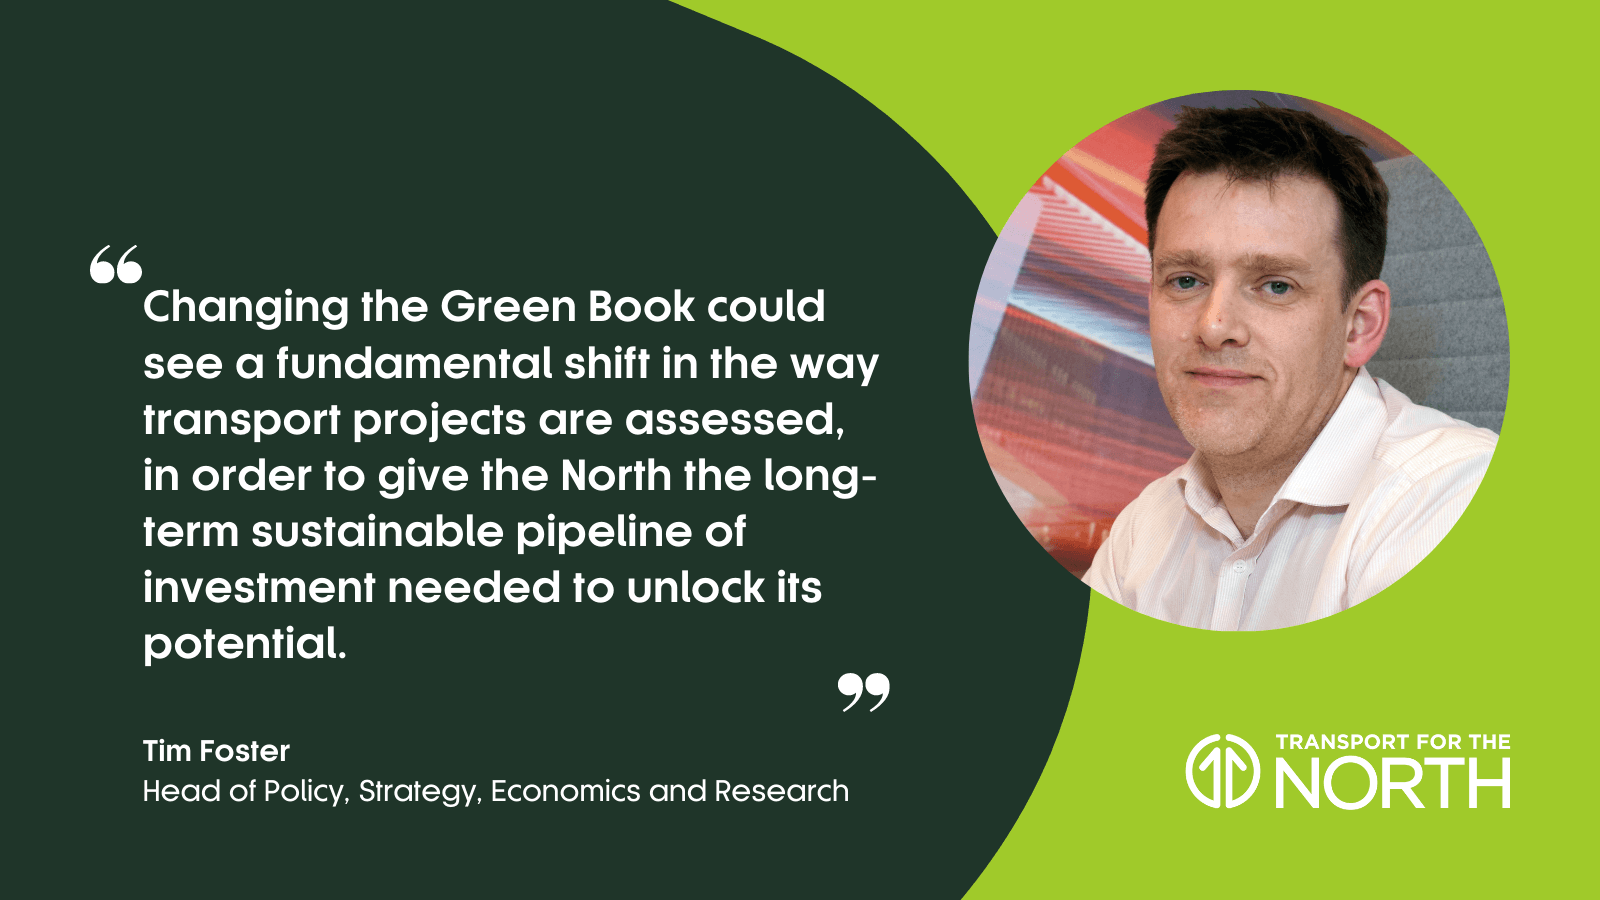 Changing the Green Book could see a fundamental shift in the way transport projects are assessed.